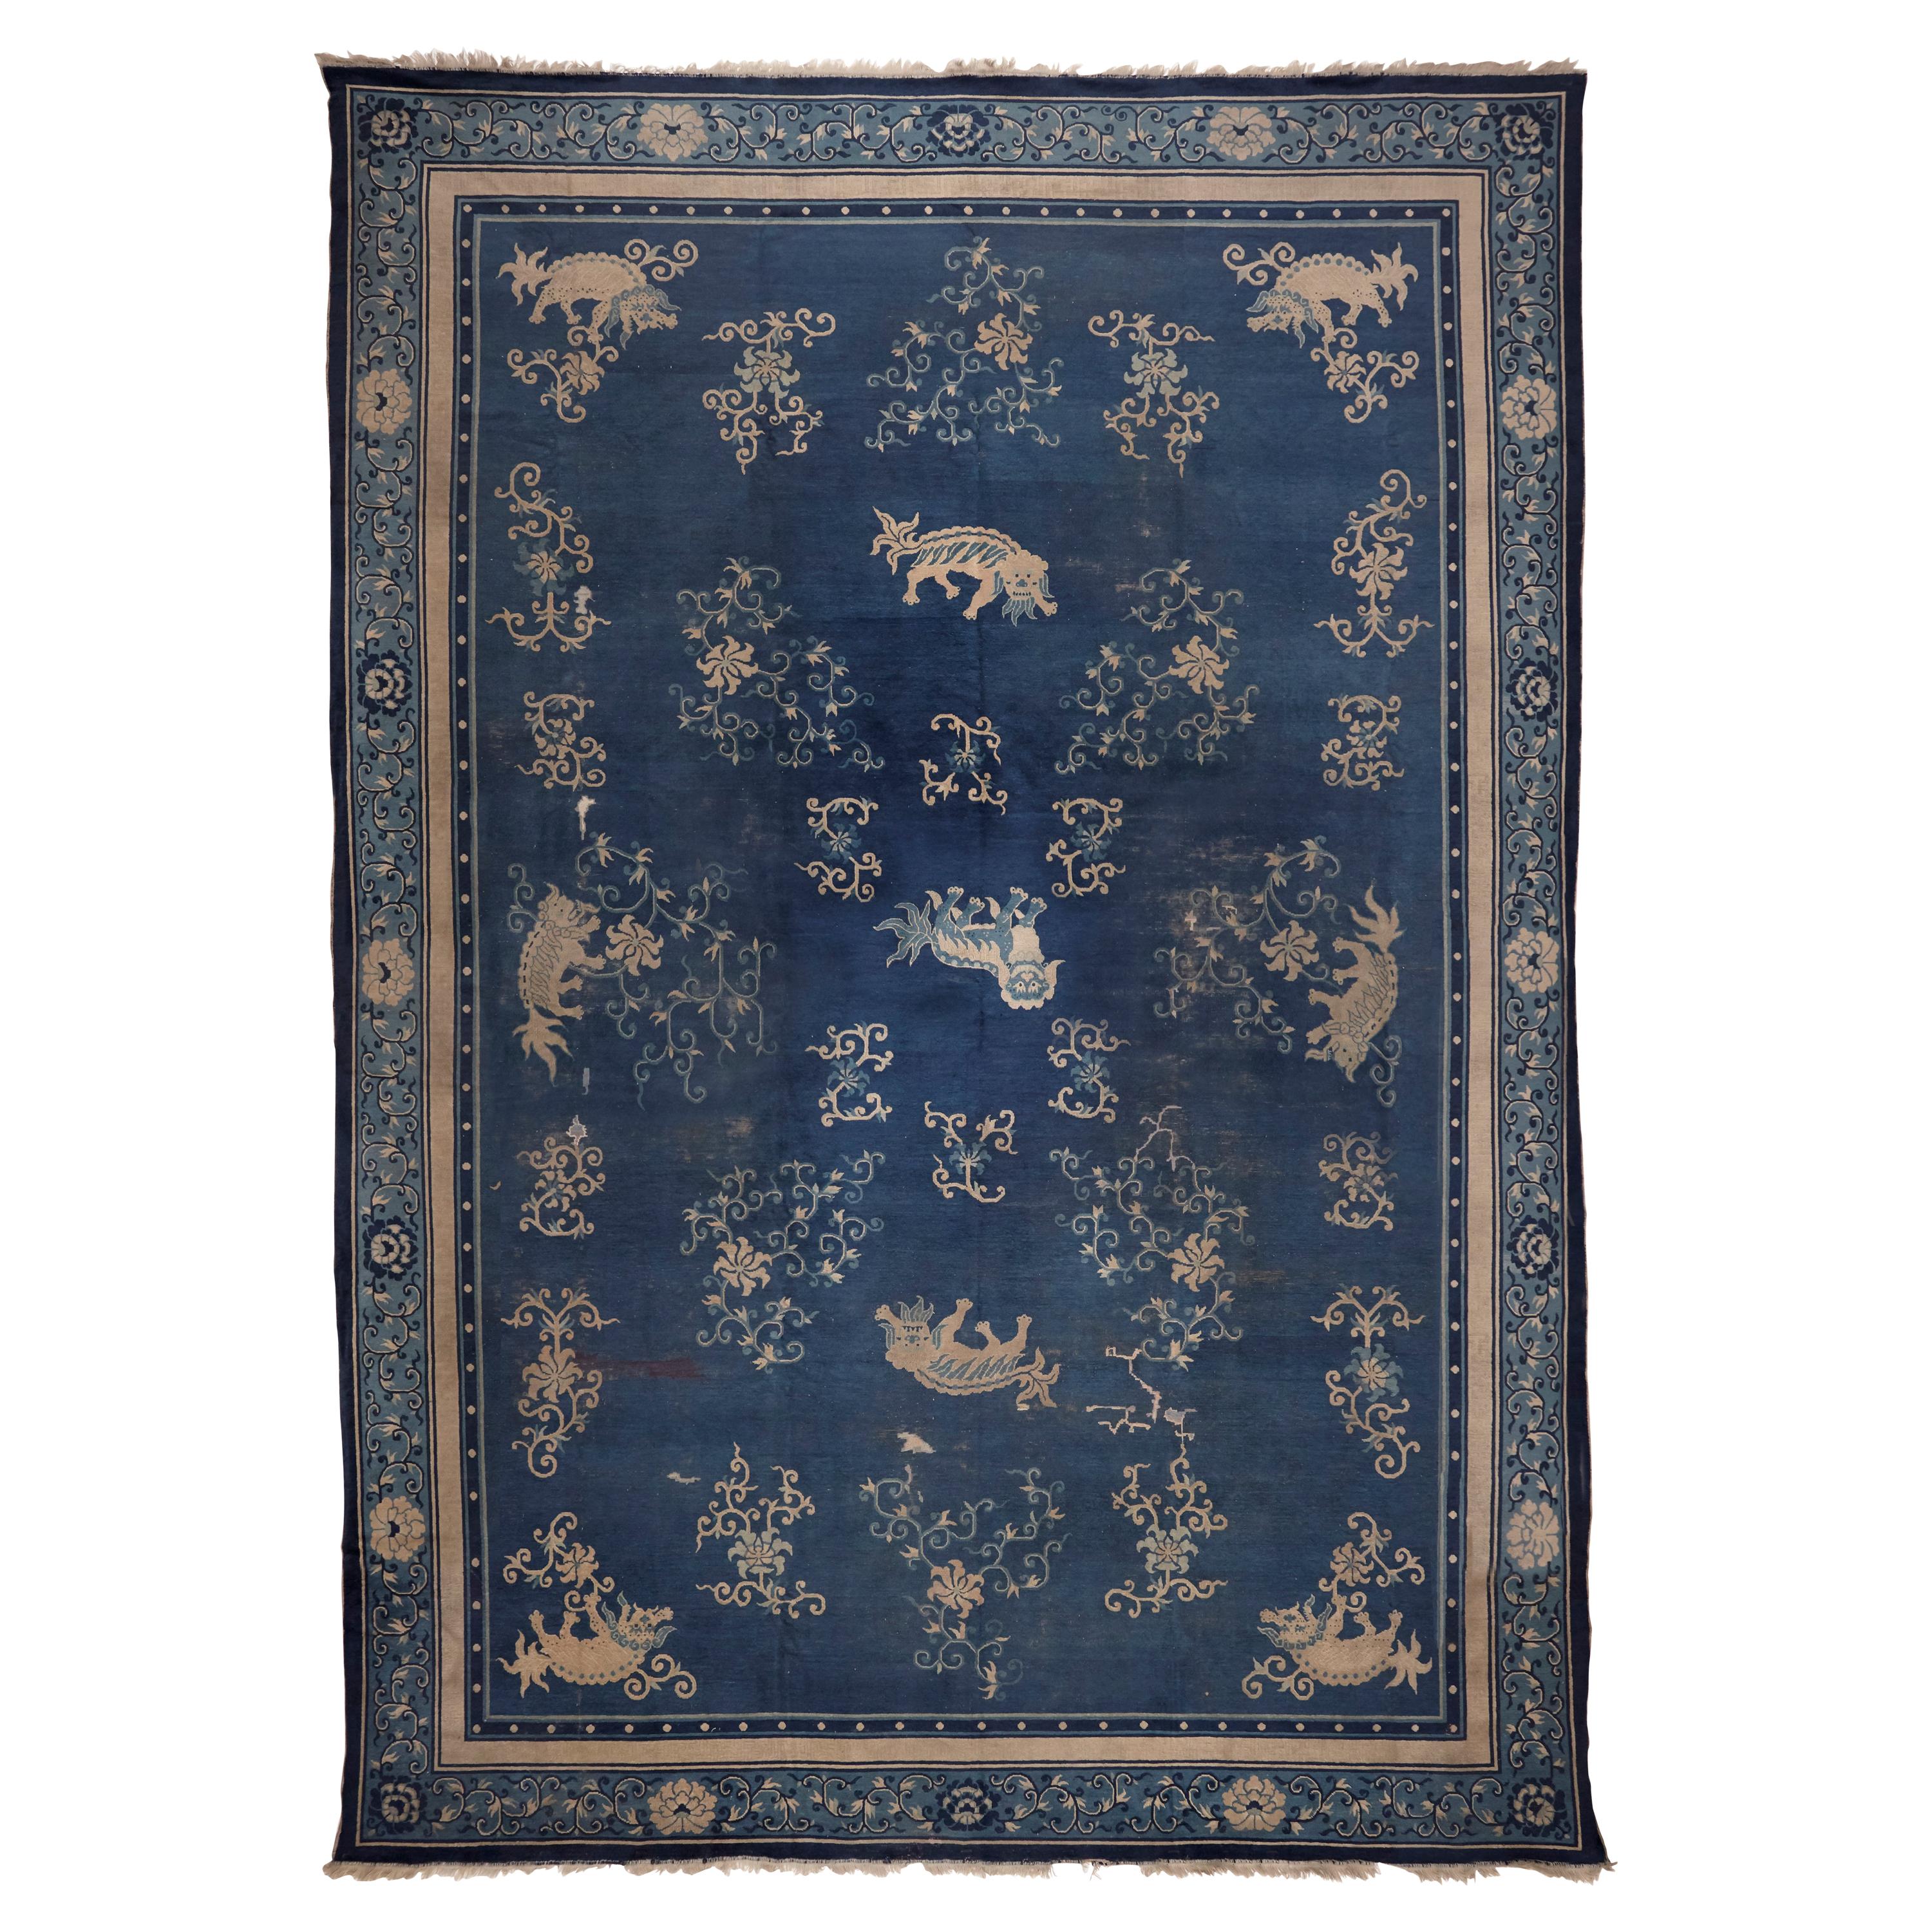 Ningshia, Chinese Export, Hand Knotted Wool, Antique Rug, circa 1890